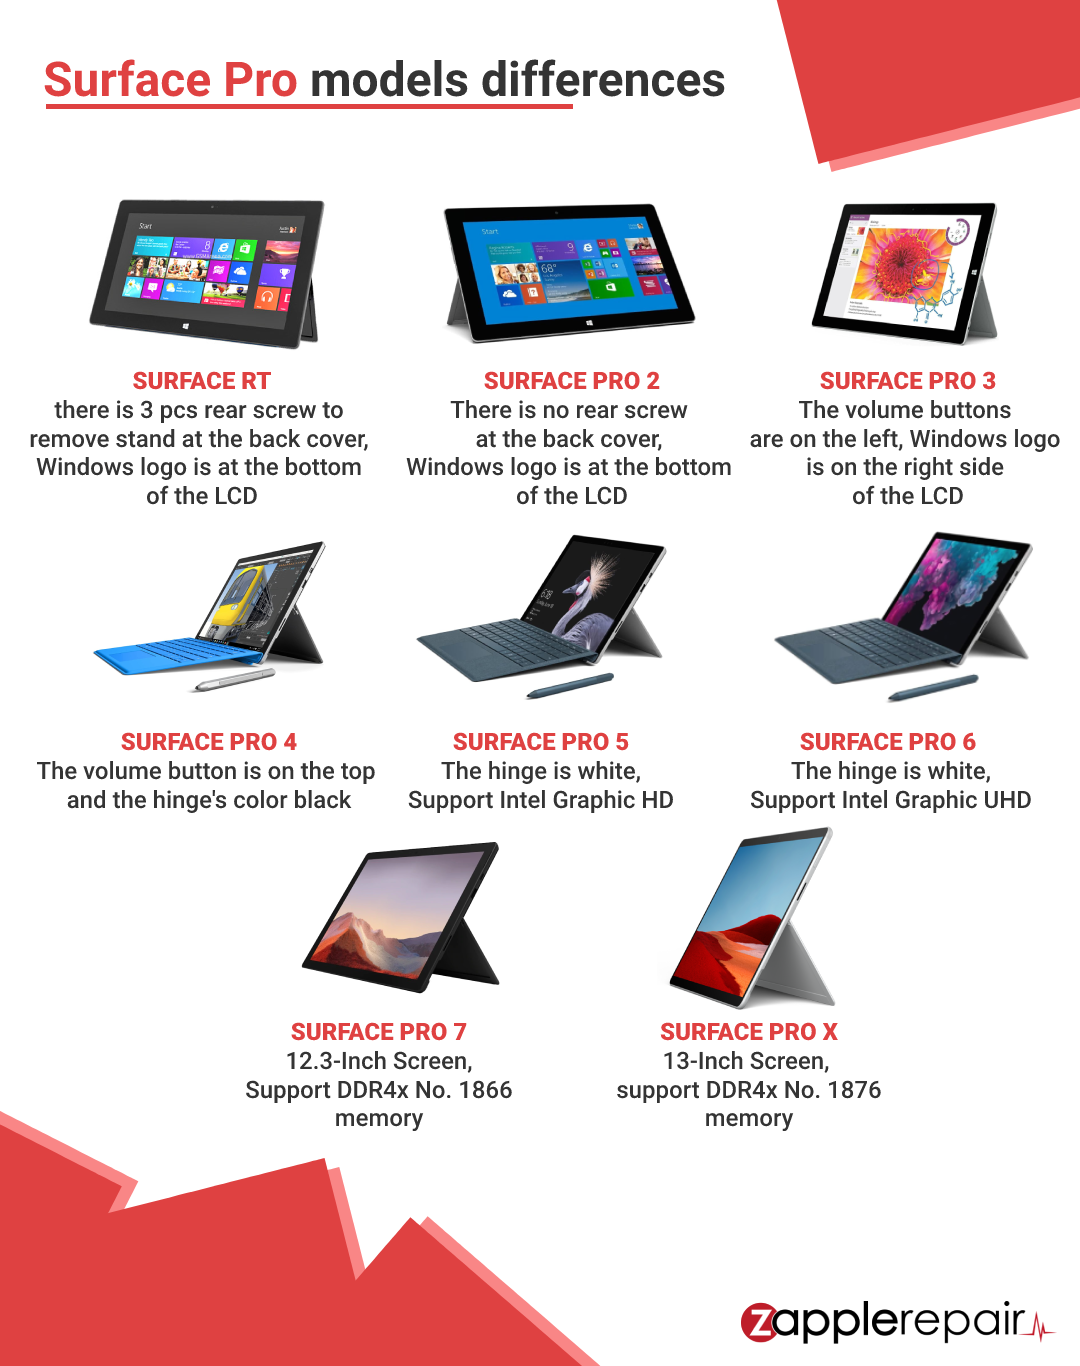 How to differentiate the model of your Surface Pro